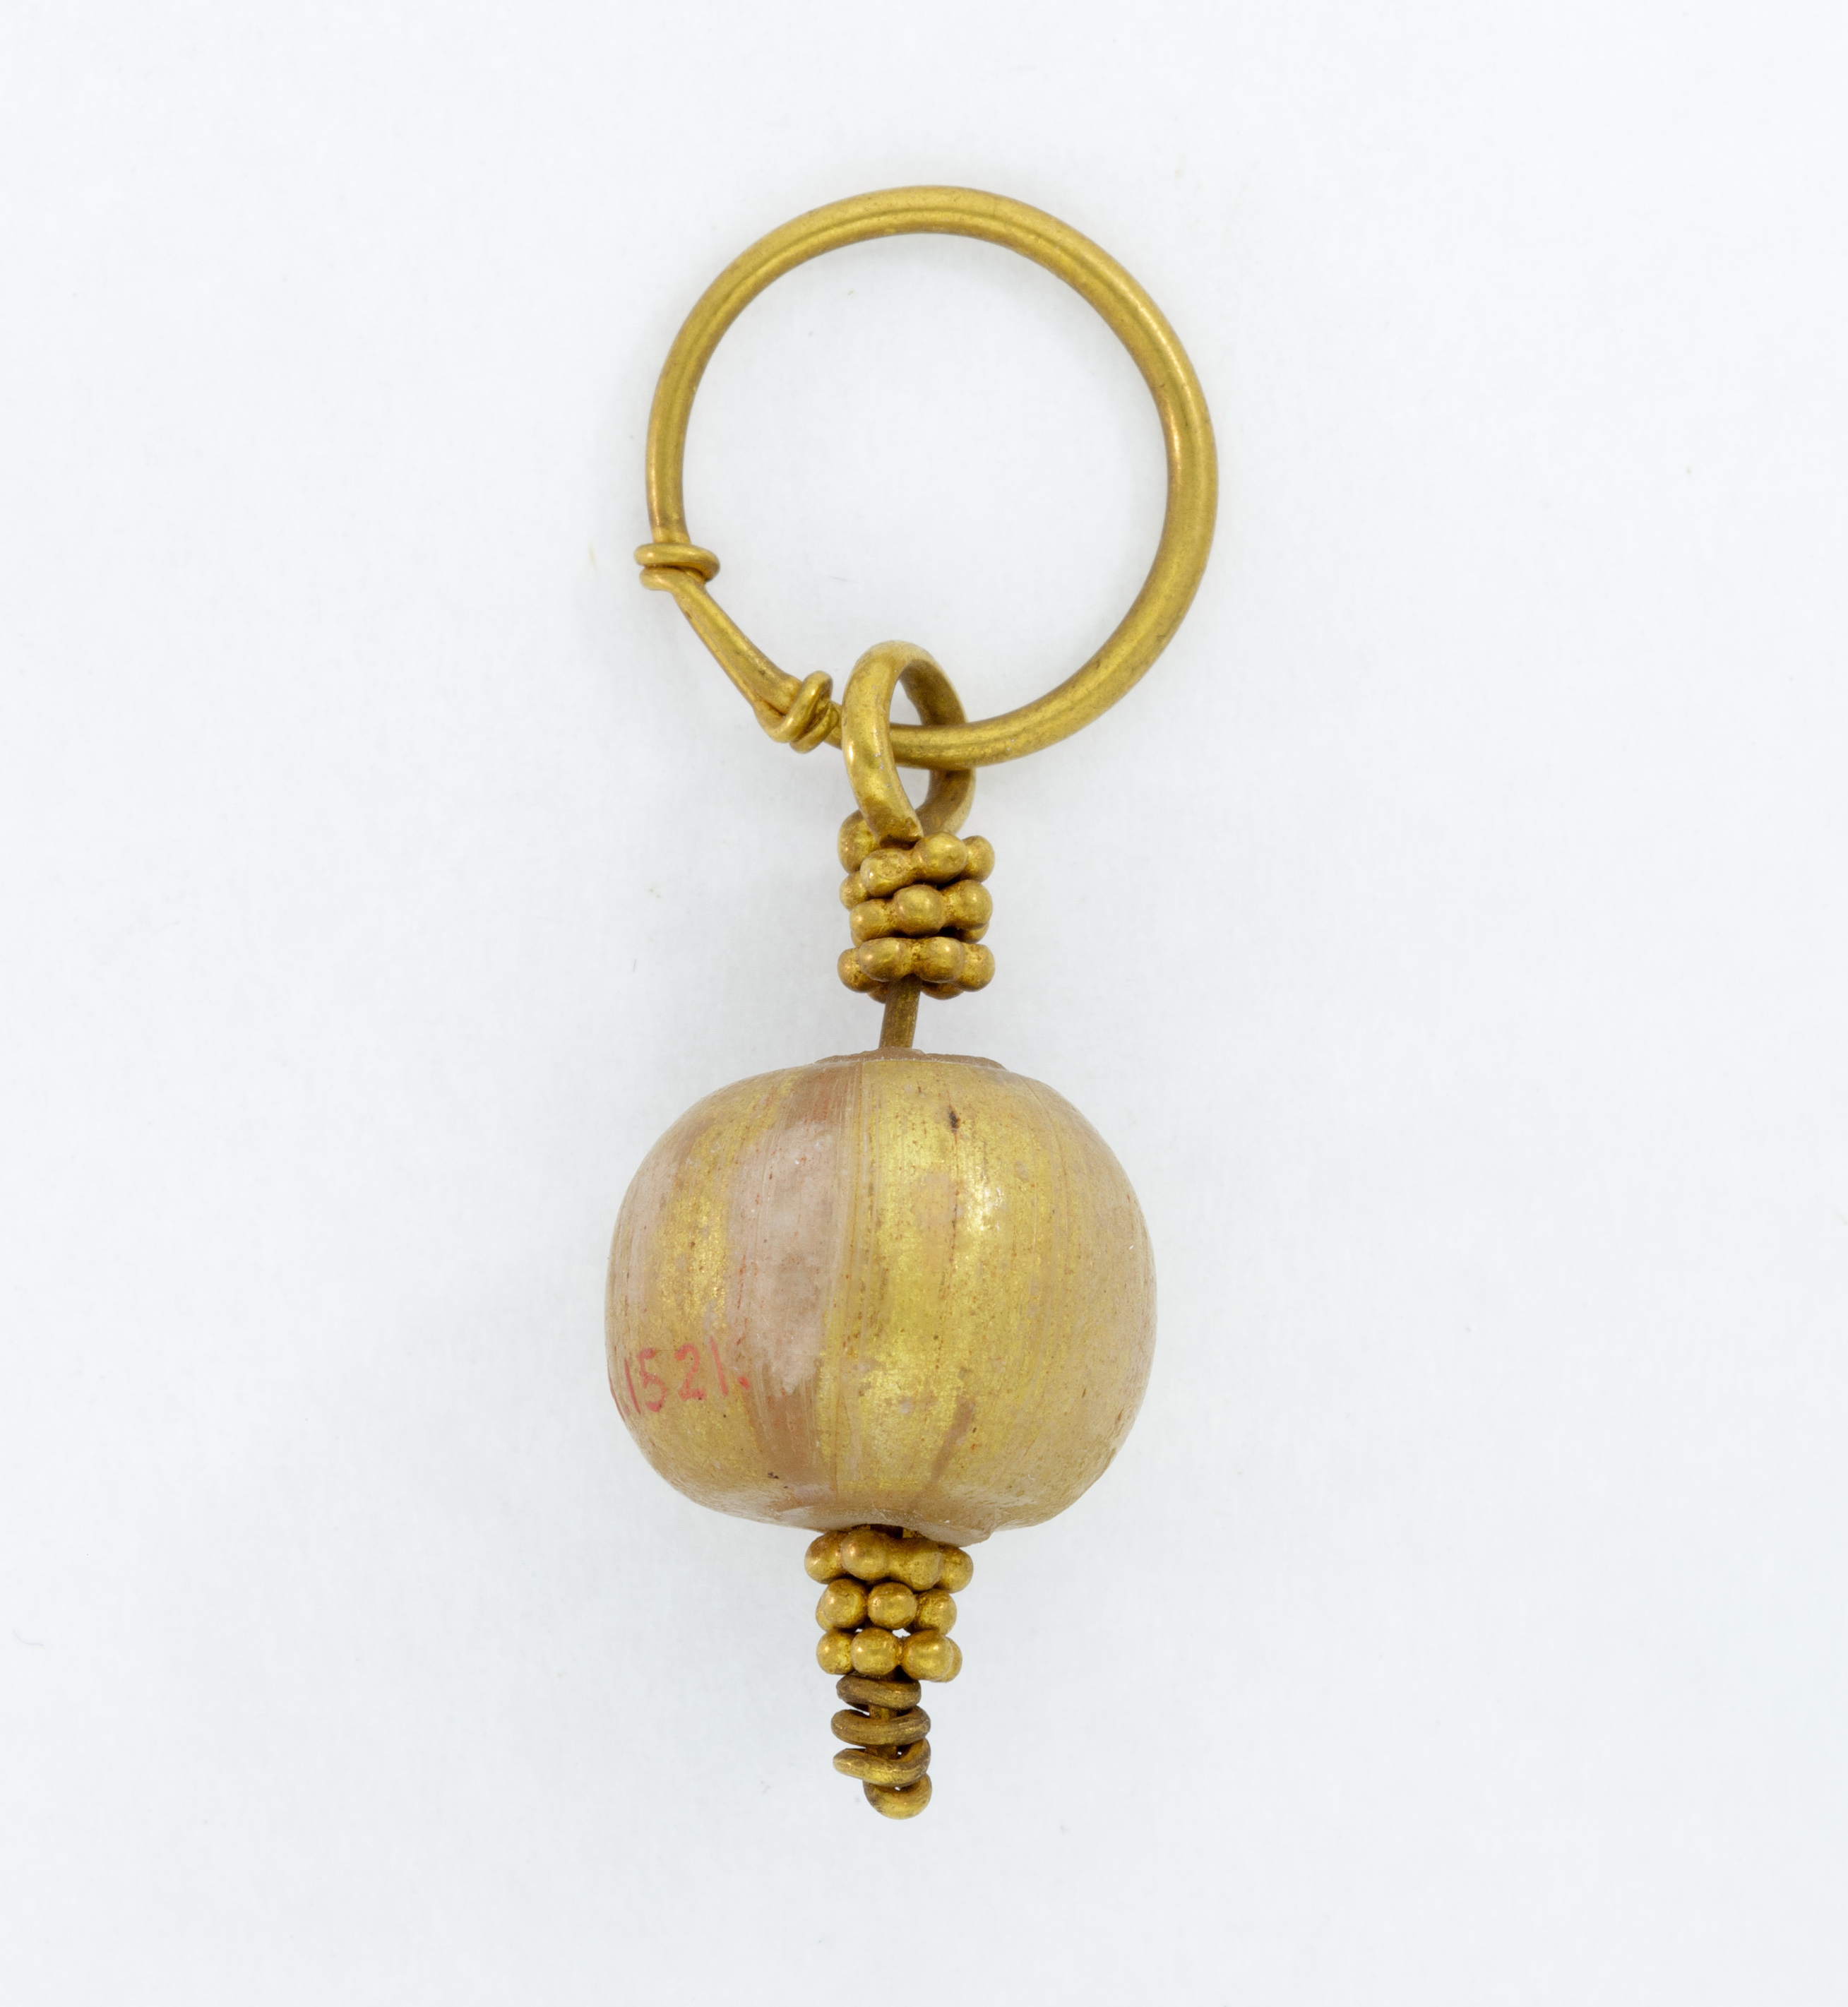 Gilded or silvered glass was popular from mid-first century B.C. to the mid-first century A.D., which is when this gilded bead earring was produced. The Metropolitan Museum of Art.